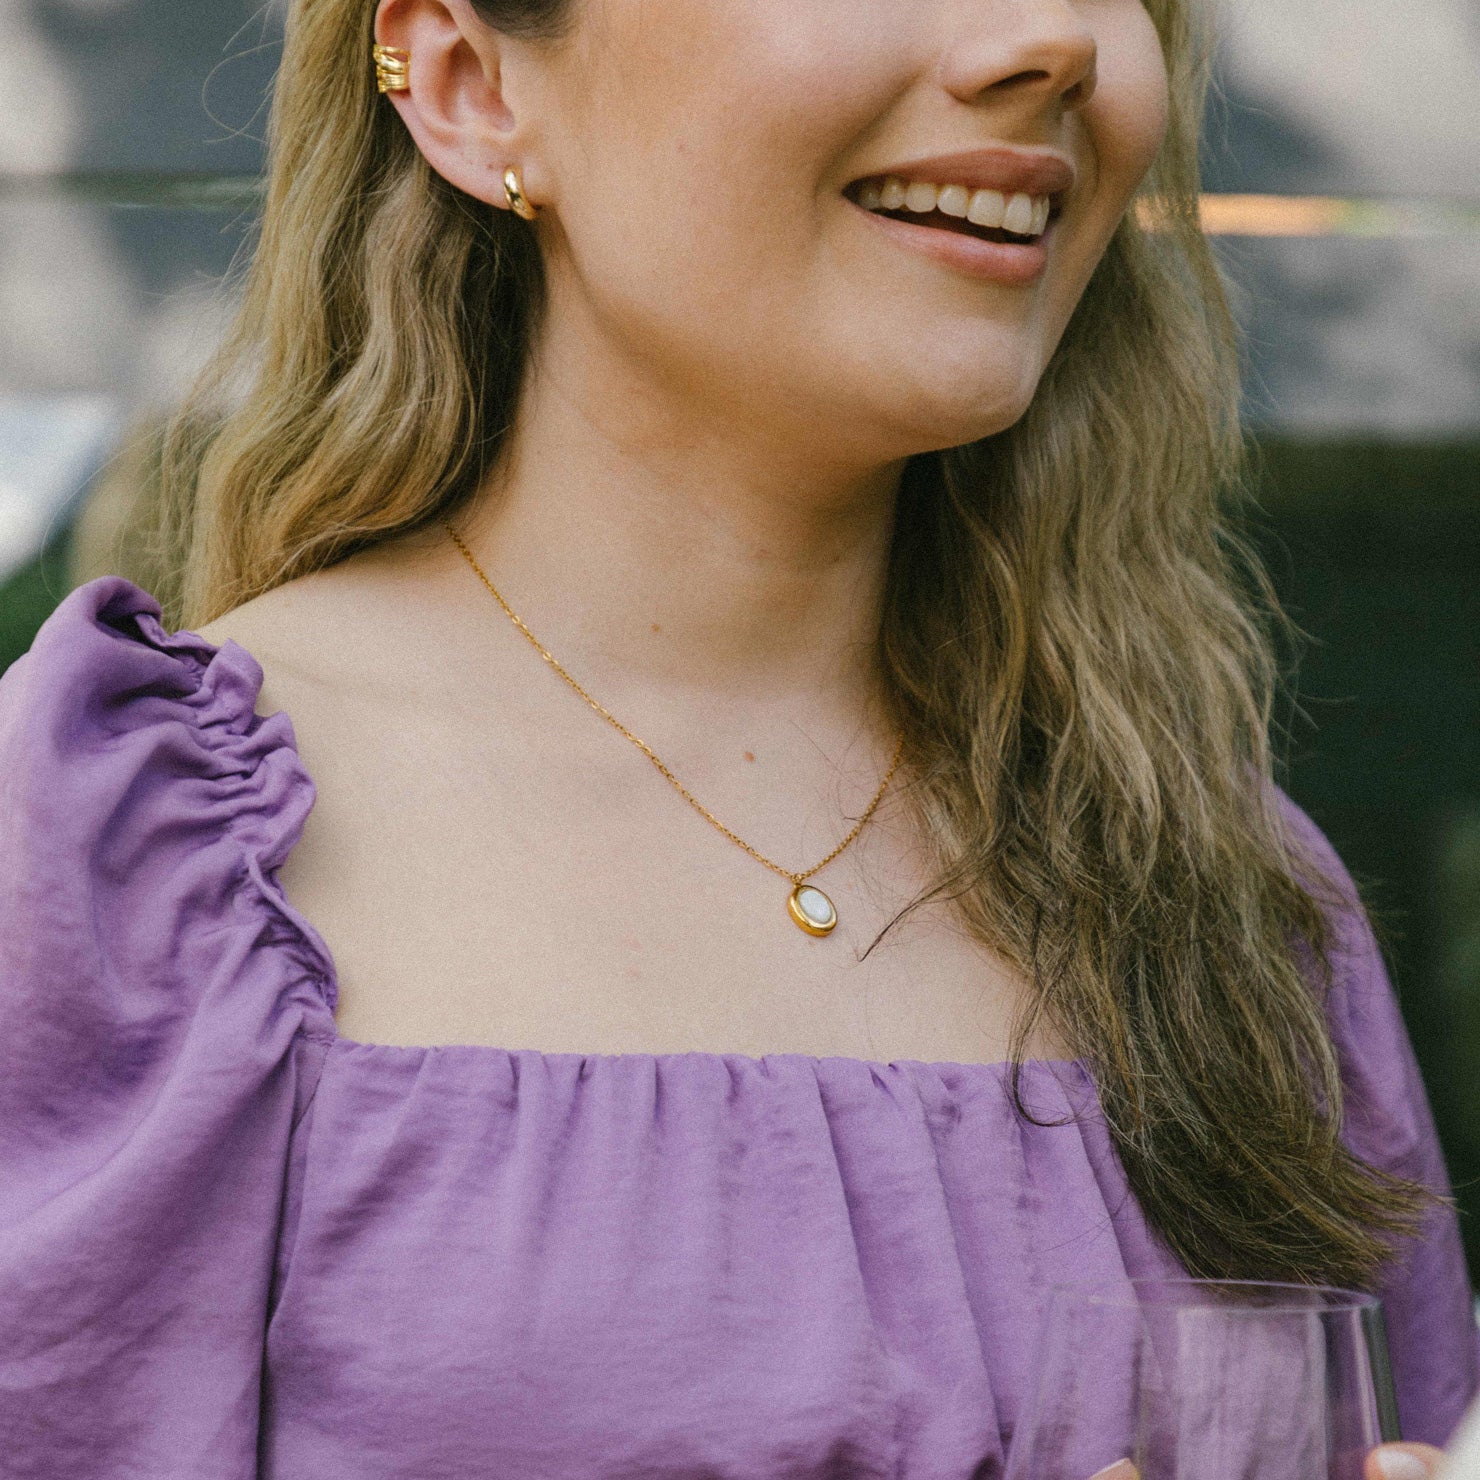 A model wearing the Mother of Pearl Pendant Necklace is crafted from 18K Gold Plated over Stainless Steel and is both non-tarnish and waterproof - perfect for everyday wear. For an added touch, pair the necklace with its sister Celestial Ring for the complete, stunning look.